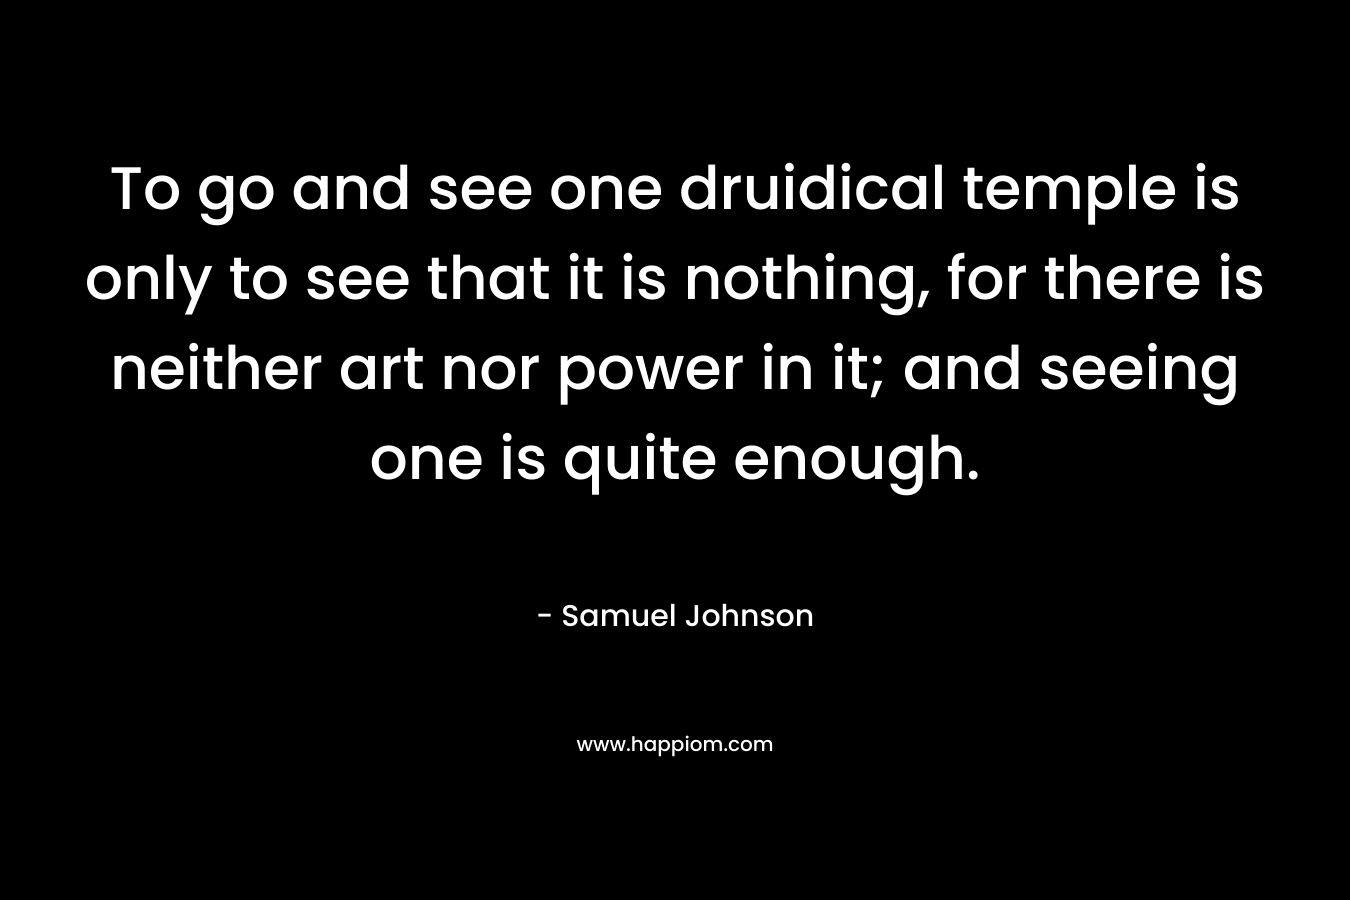 To go and see one druidical temple is only to see that it is nothing, for there is neither art nor power in it; and seeing one is quite enough.